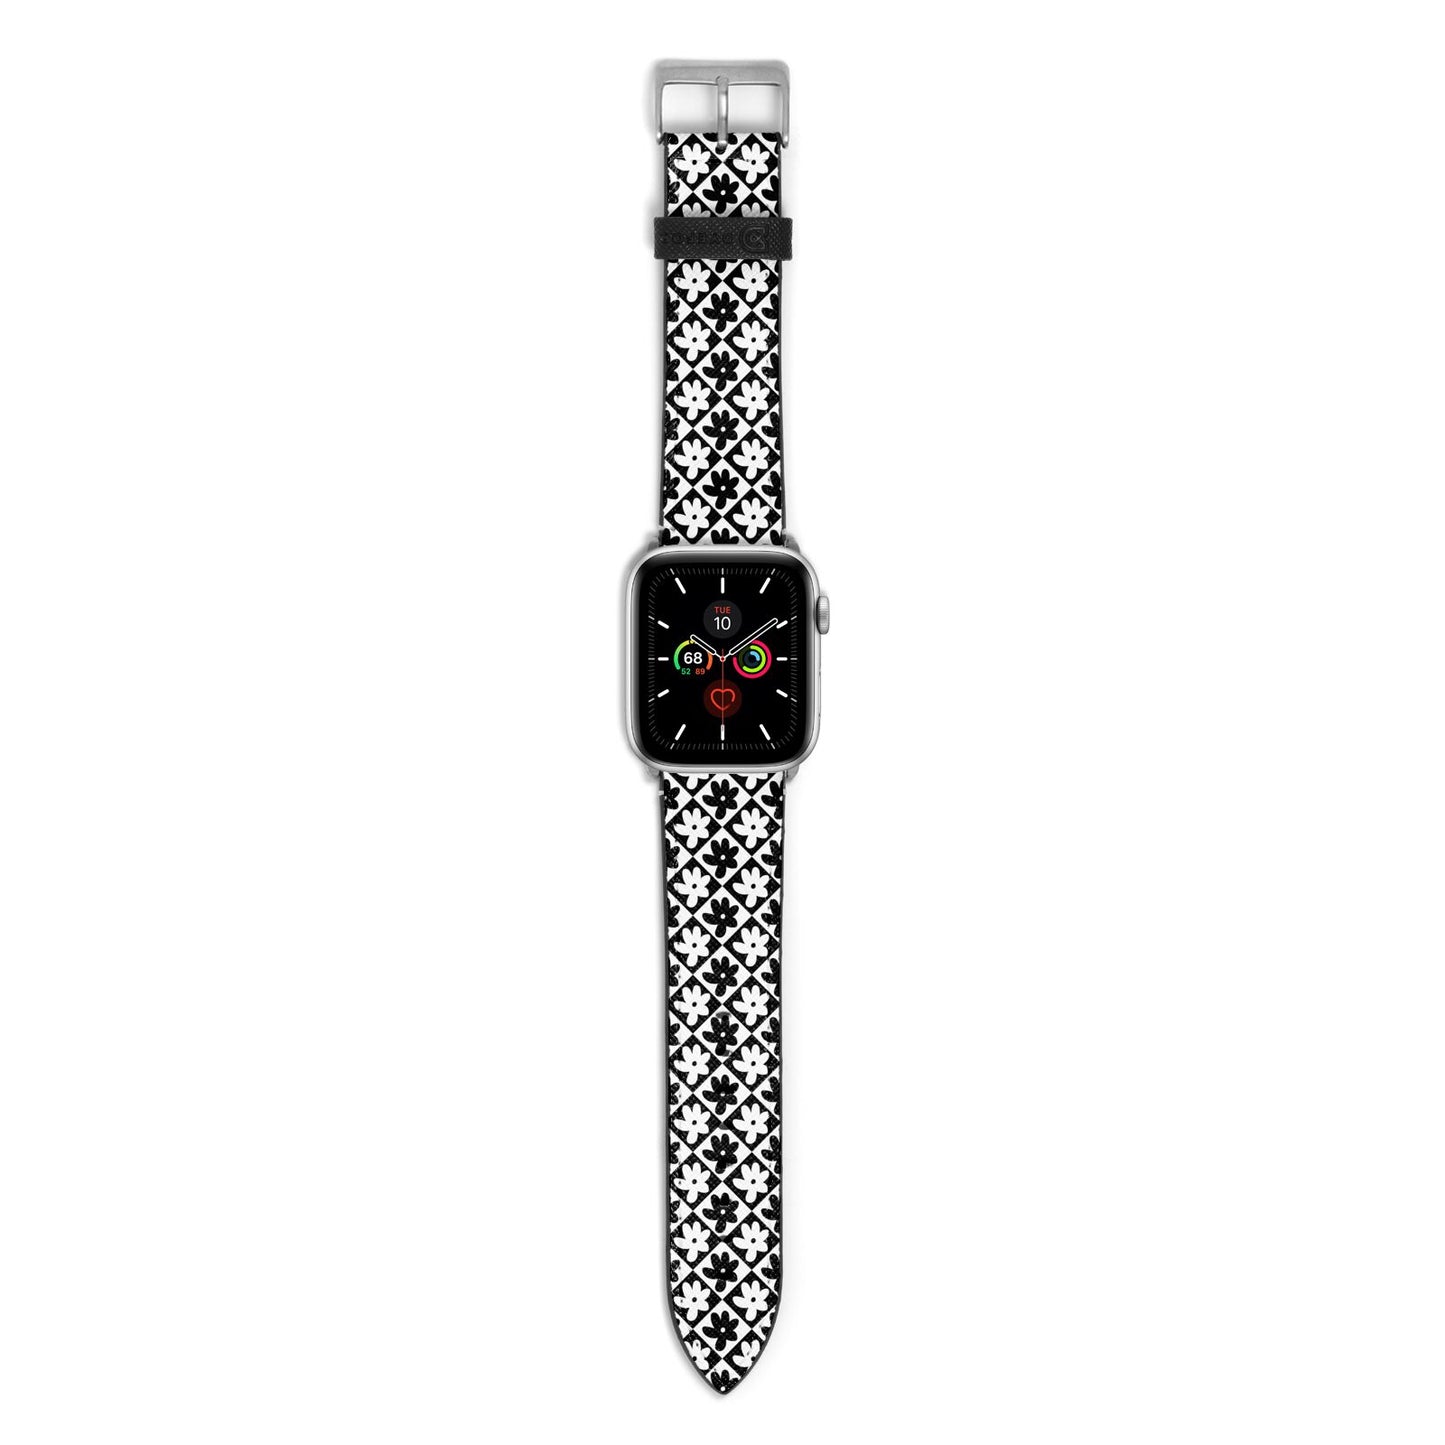 Check Flower Apple Watch Strap with Silver Hardware